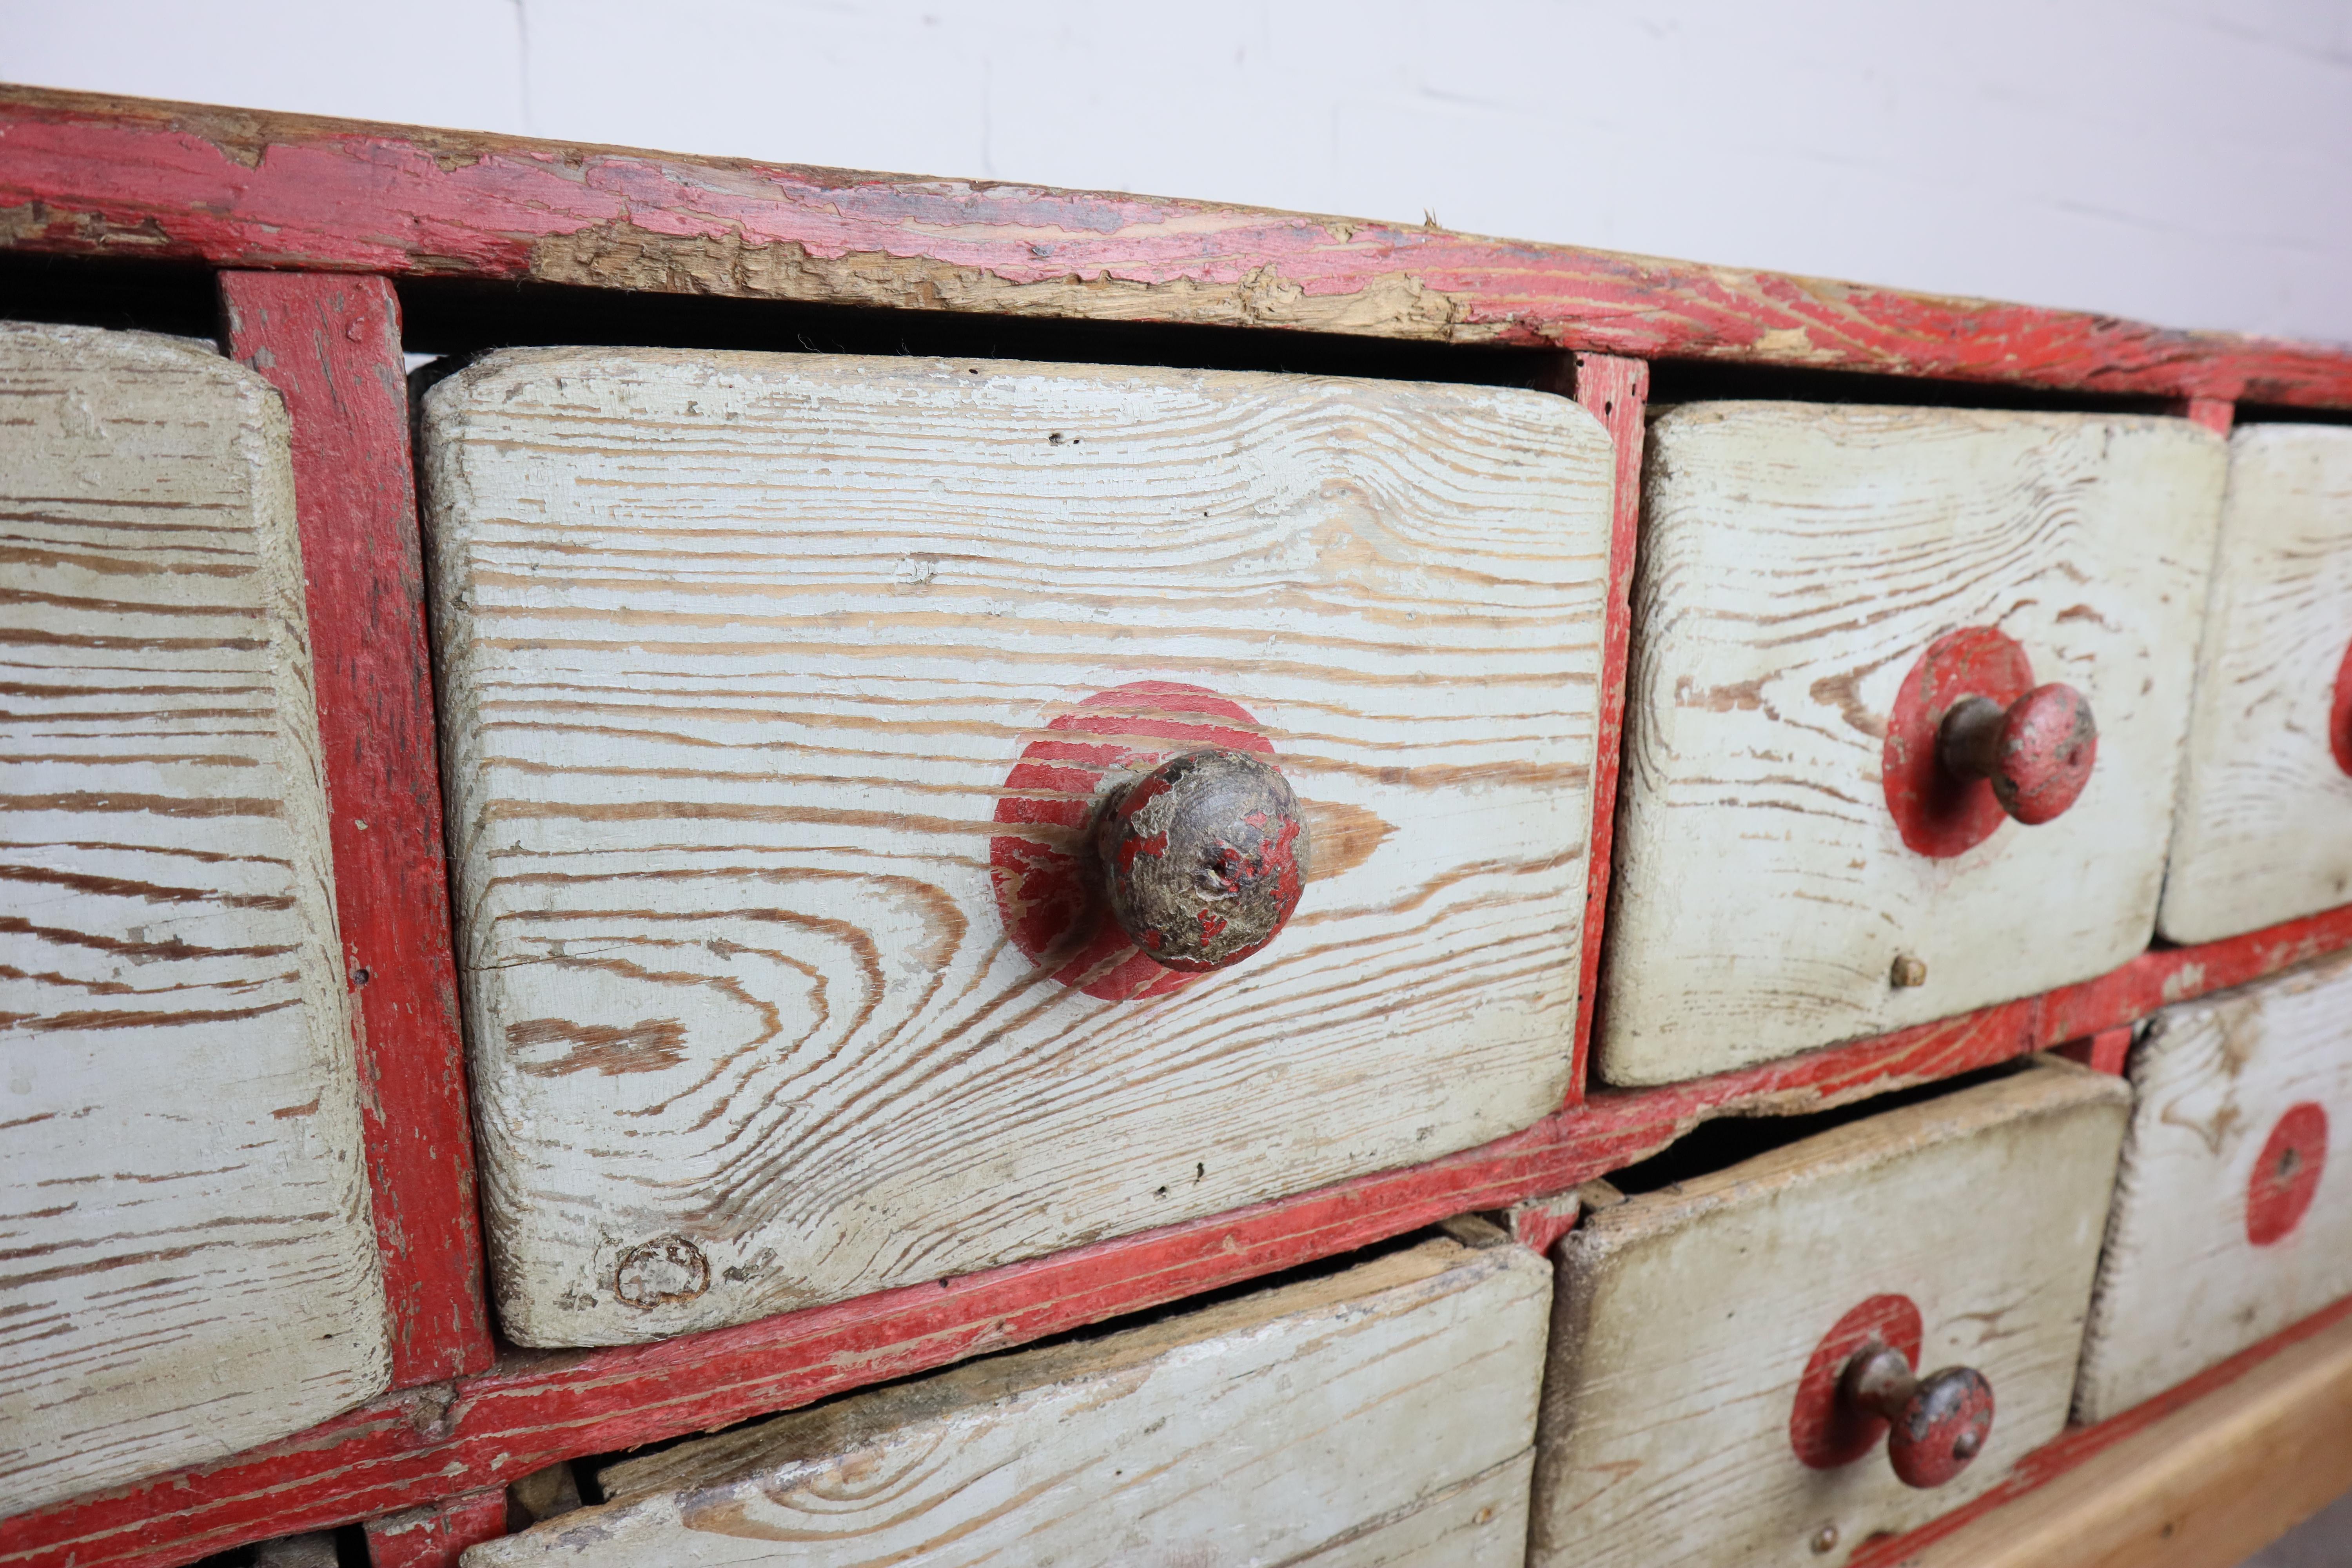 Antique drawer cabinet from an old workshop! 
This cabinet has built an incredible patina through years of use.